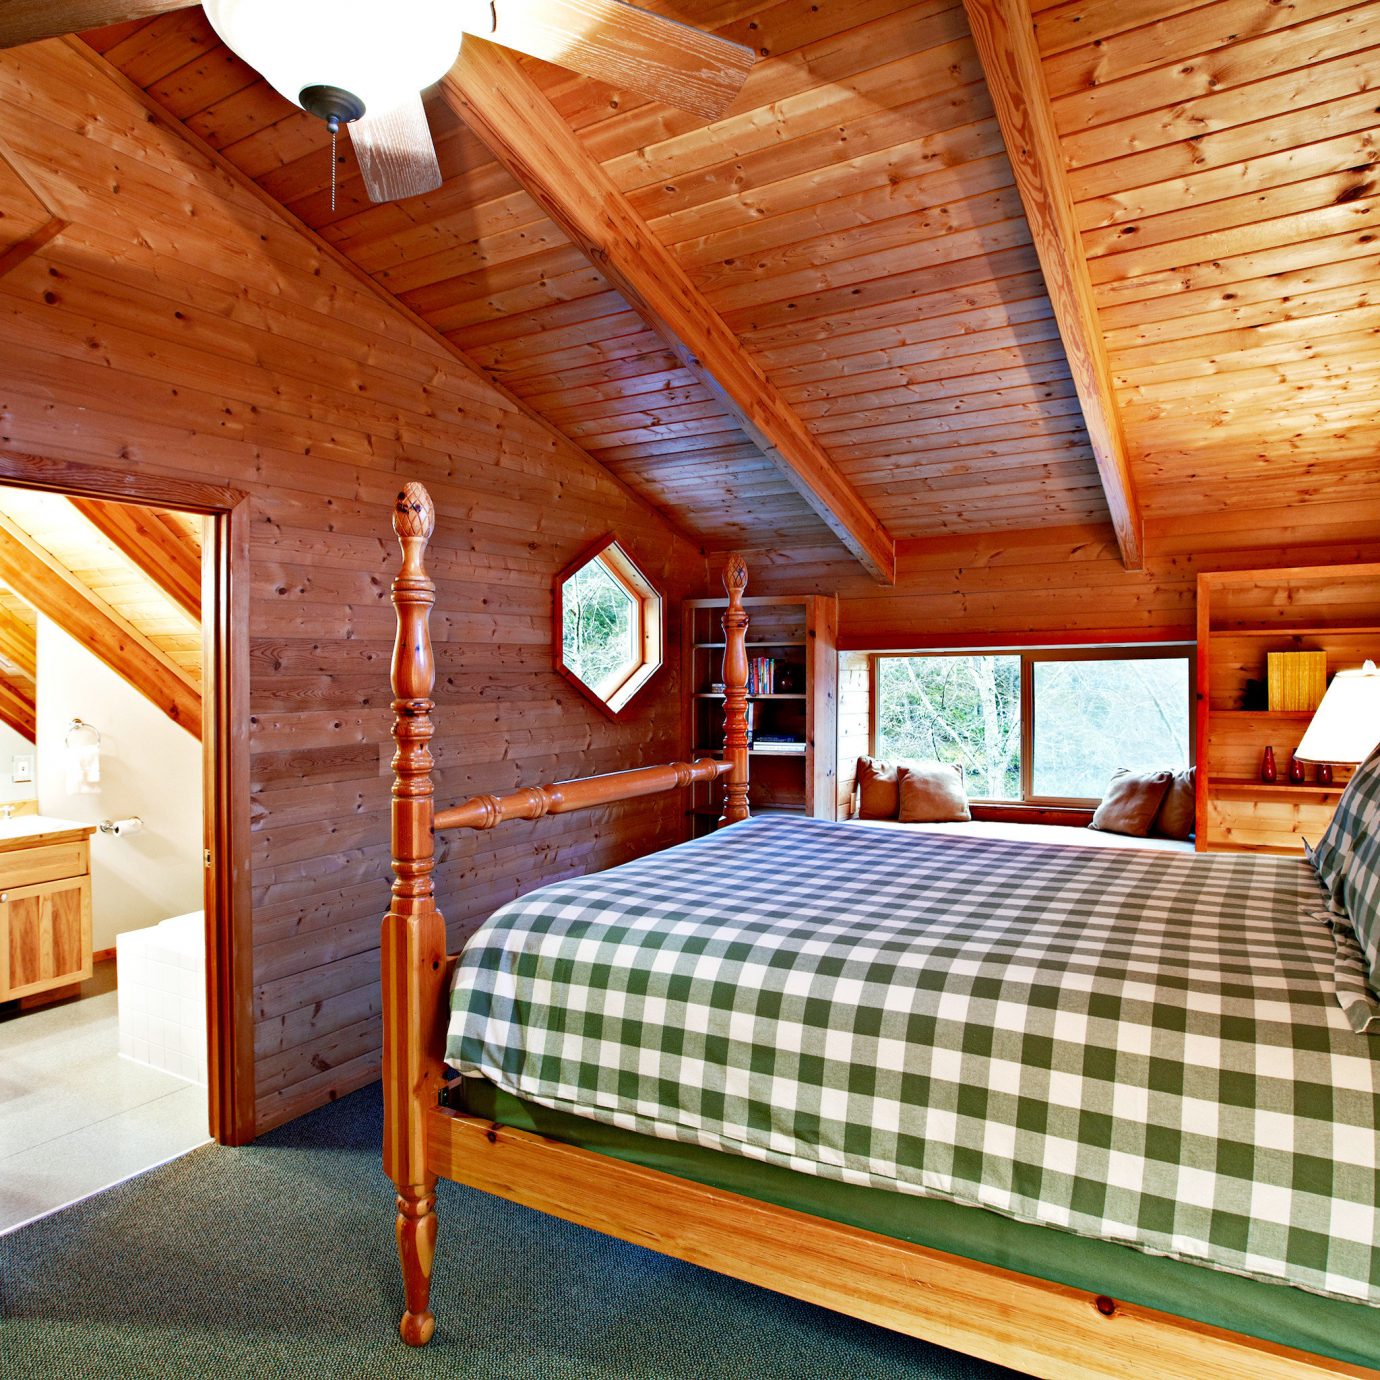 Bedroom Fireplace Lodge Resort Rustic Scenic views property log cabin wooden cottage home farmhouse Villa